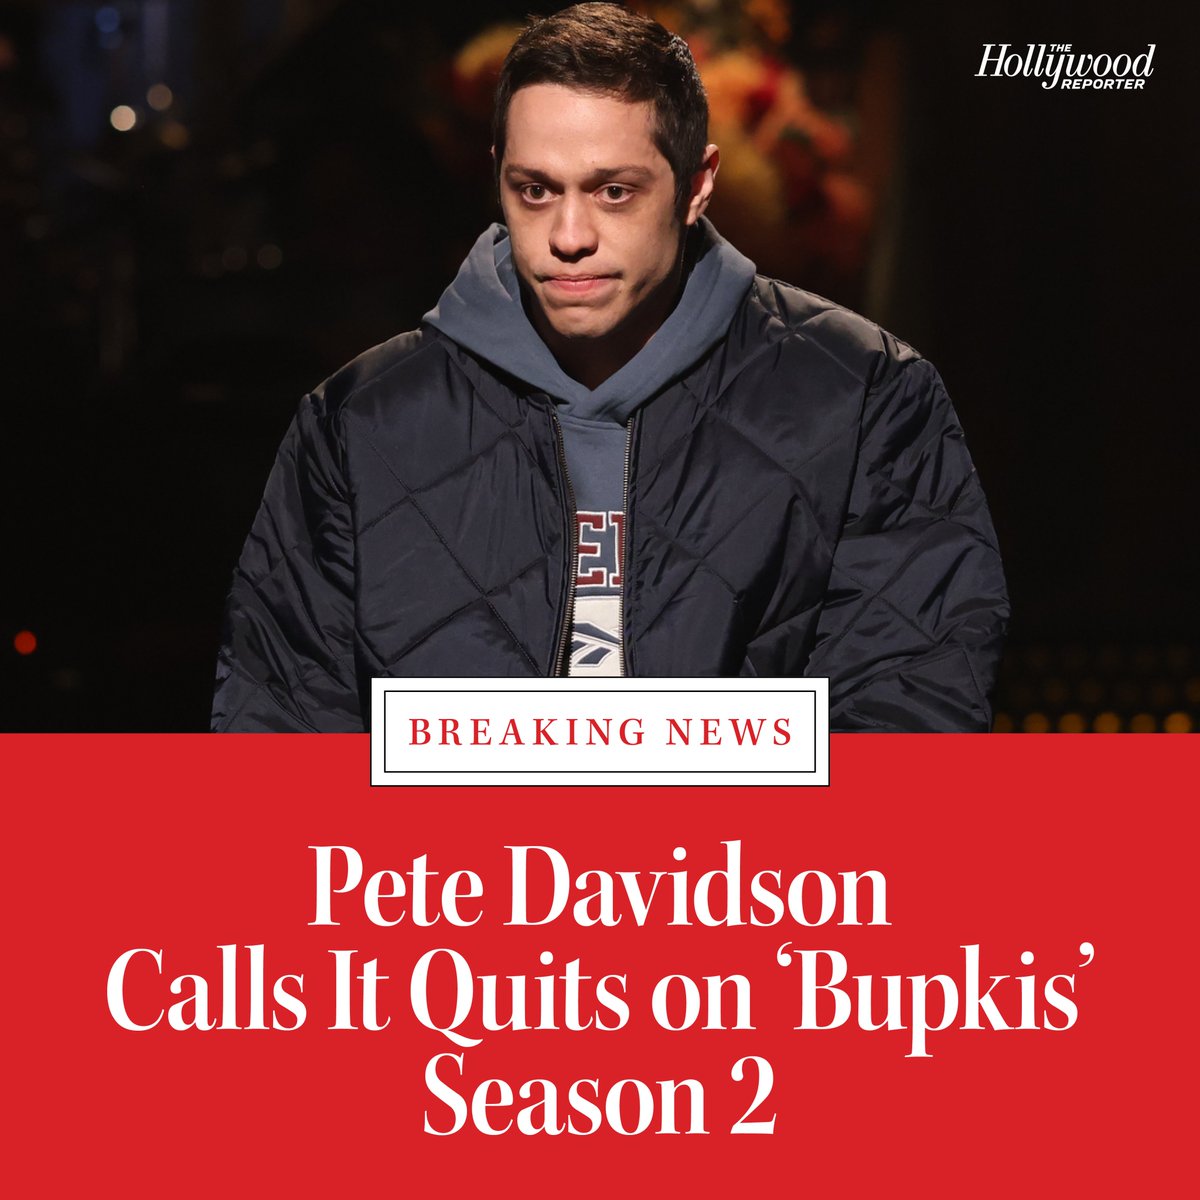 Pete Davidson has called it quits on #Bupkis and is walking away from the previously announced second season: 'This part of my life is finished' thr.cm/w0K2vqV